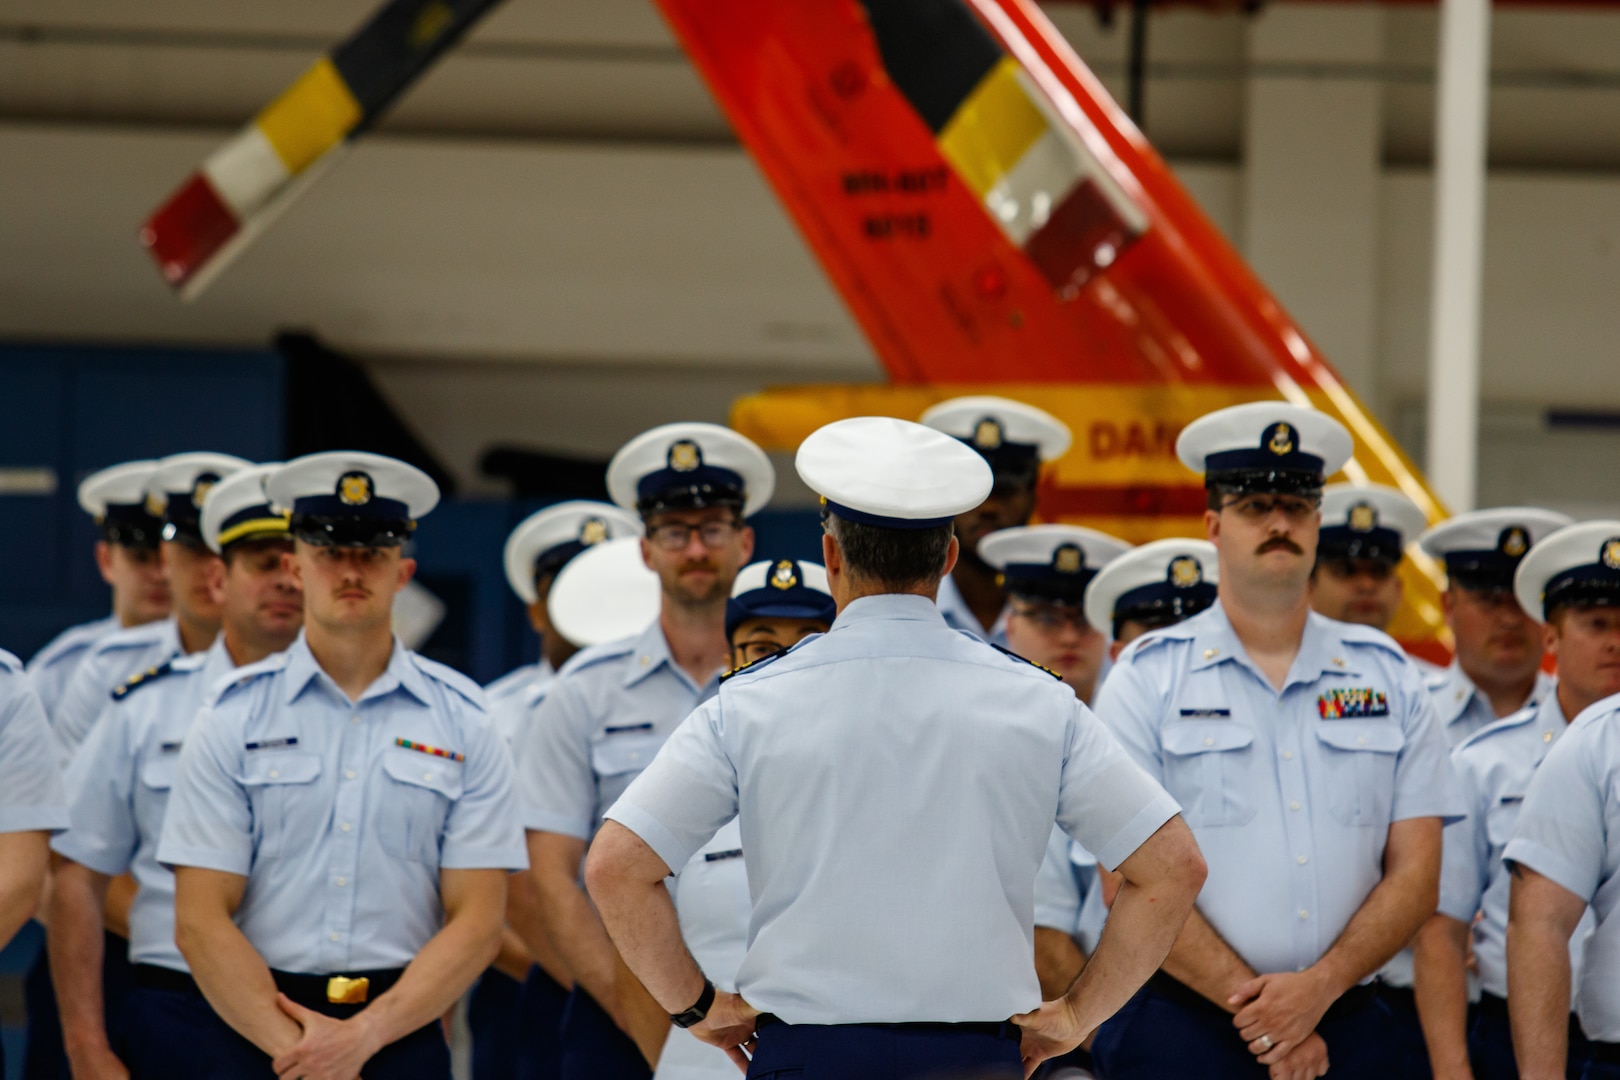 Capt. Vincent Jansen transferred command of Coast Guard Air Station Sitka to Cmdr. Rand Semke. Rear Adm. Megan Dean, commander, Coast Guard Seventeenth District, presided over the ceremony.